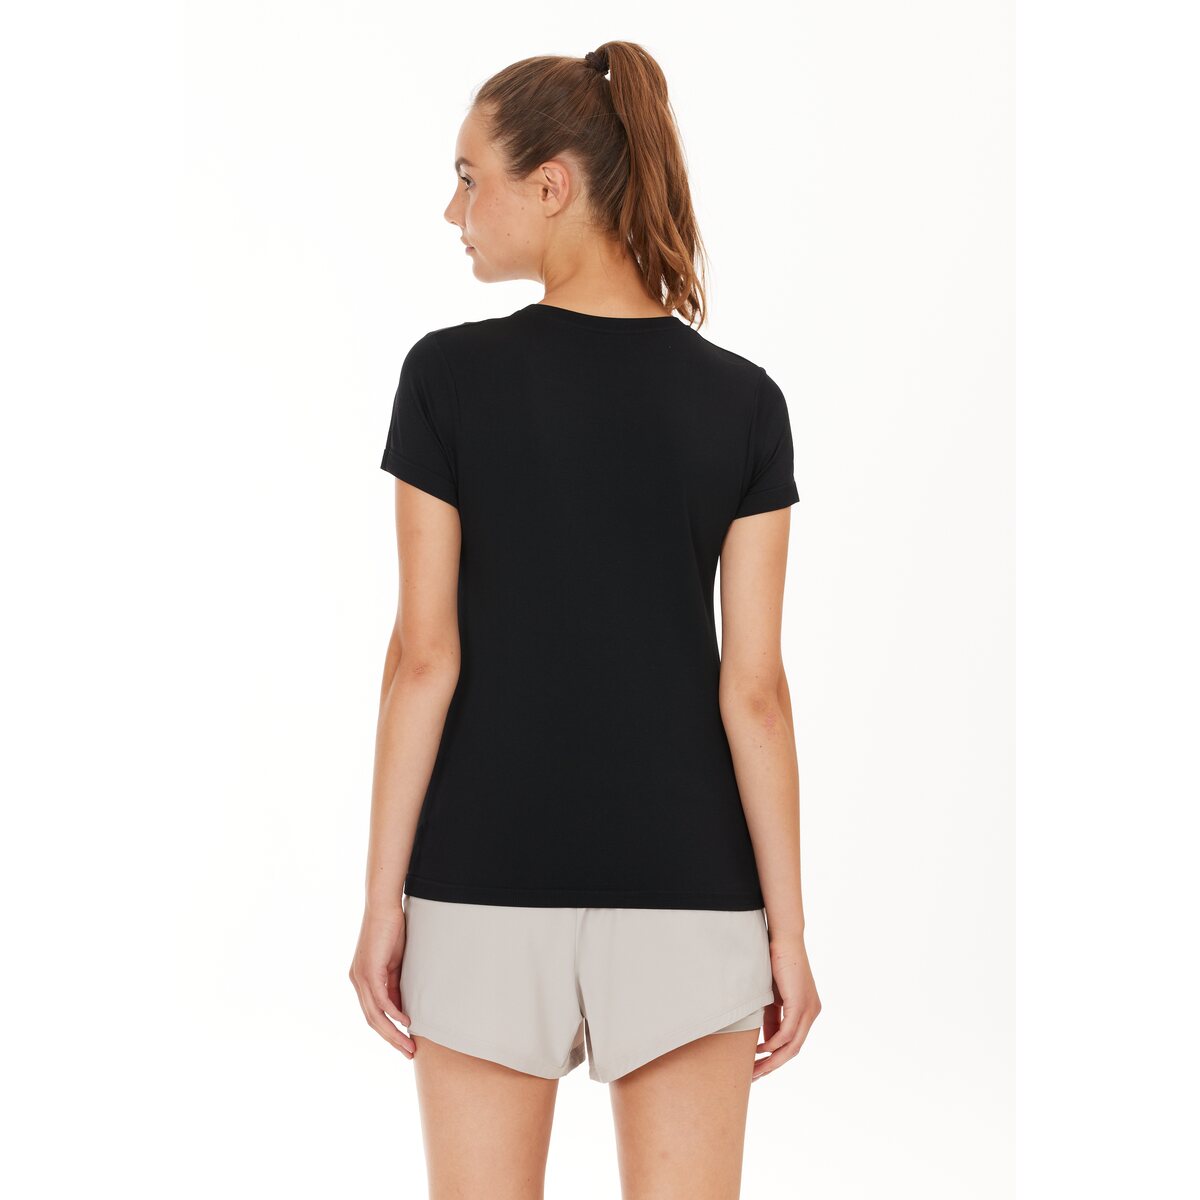 Athlecia Julee Womenswear Loose Fit Seamless Tee - Black 3 Shaws Department Stores